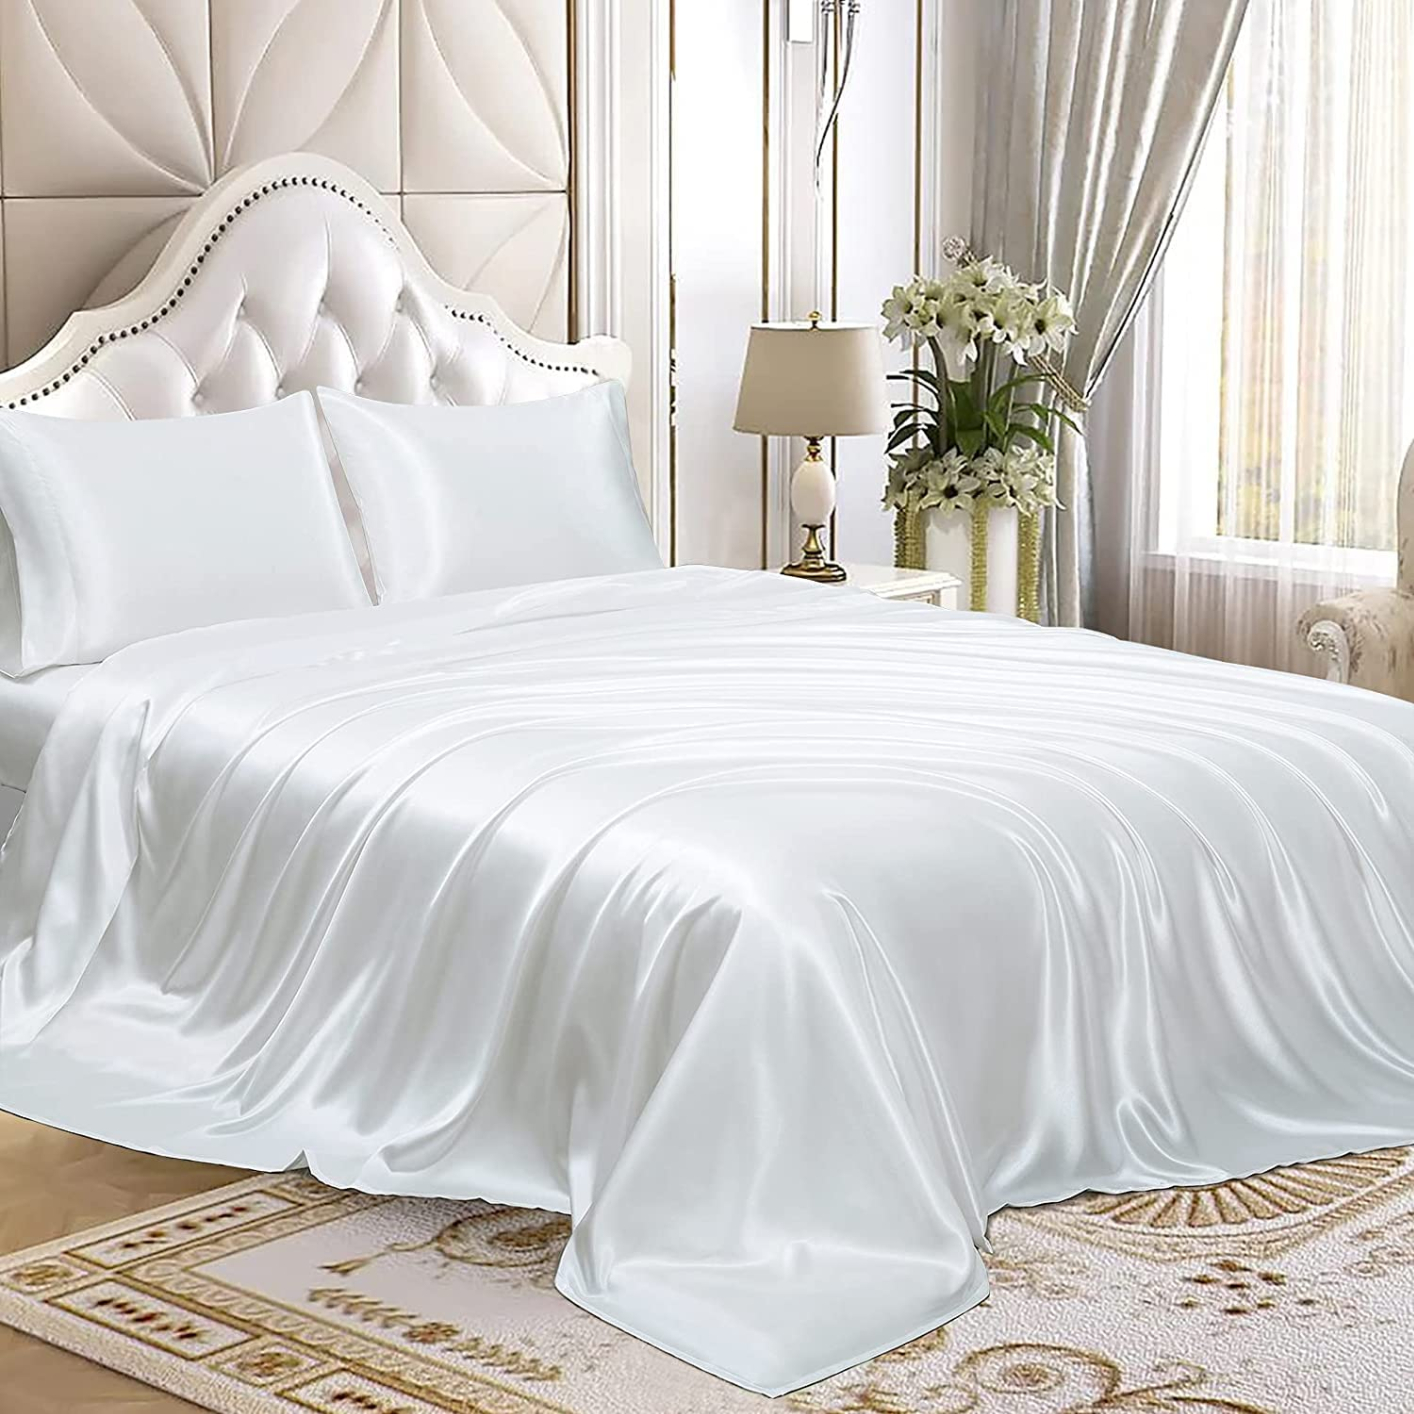 JT013-35 4PCS Bed Sheets Set, Hotel Luxury Bedding Sheets & Pillowcases Including 1 Top Flat Sheet+1 Fitted Sheet+2 Pillowcases , Wrinkle Fade Stain Resistant
